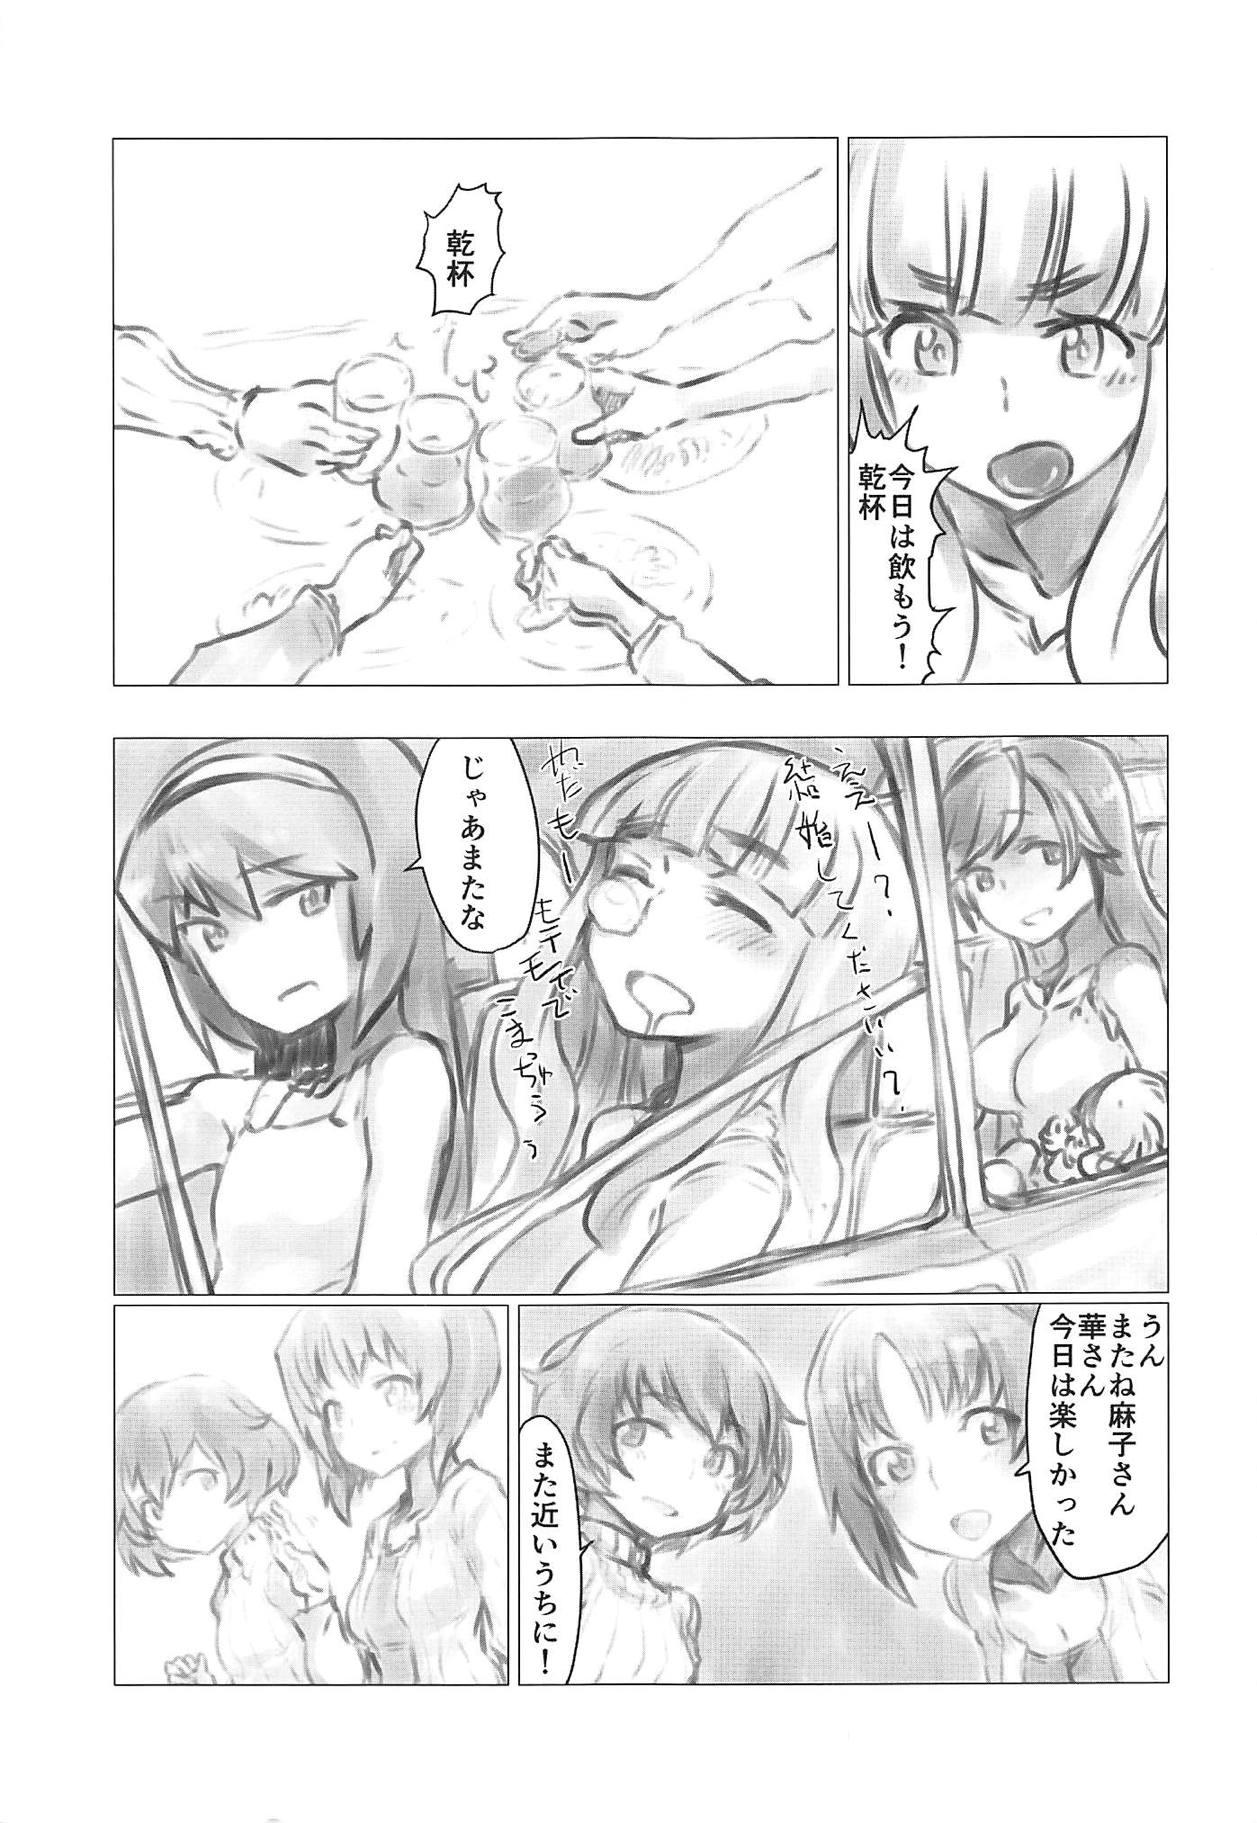 Polish THE DOG MAY STAND THE STRONG INSTEAD - Girls und panzer Women - Page 4